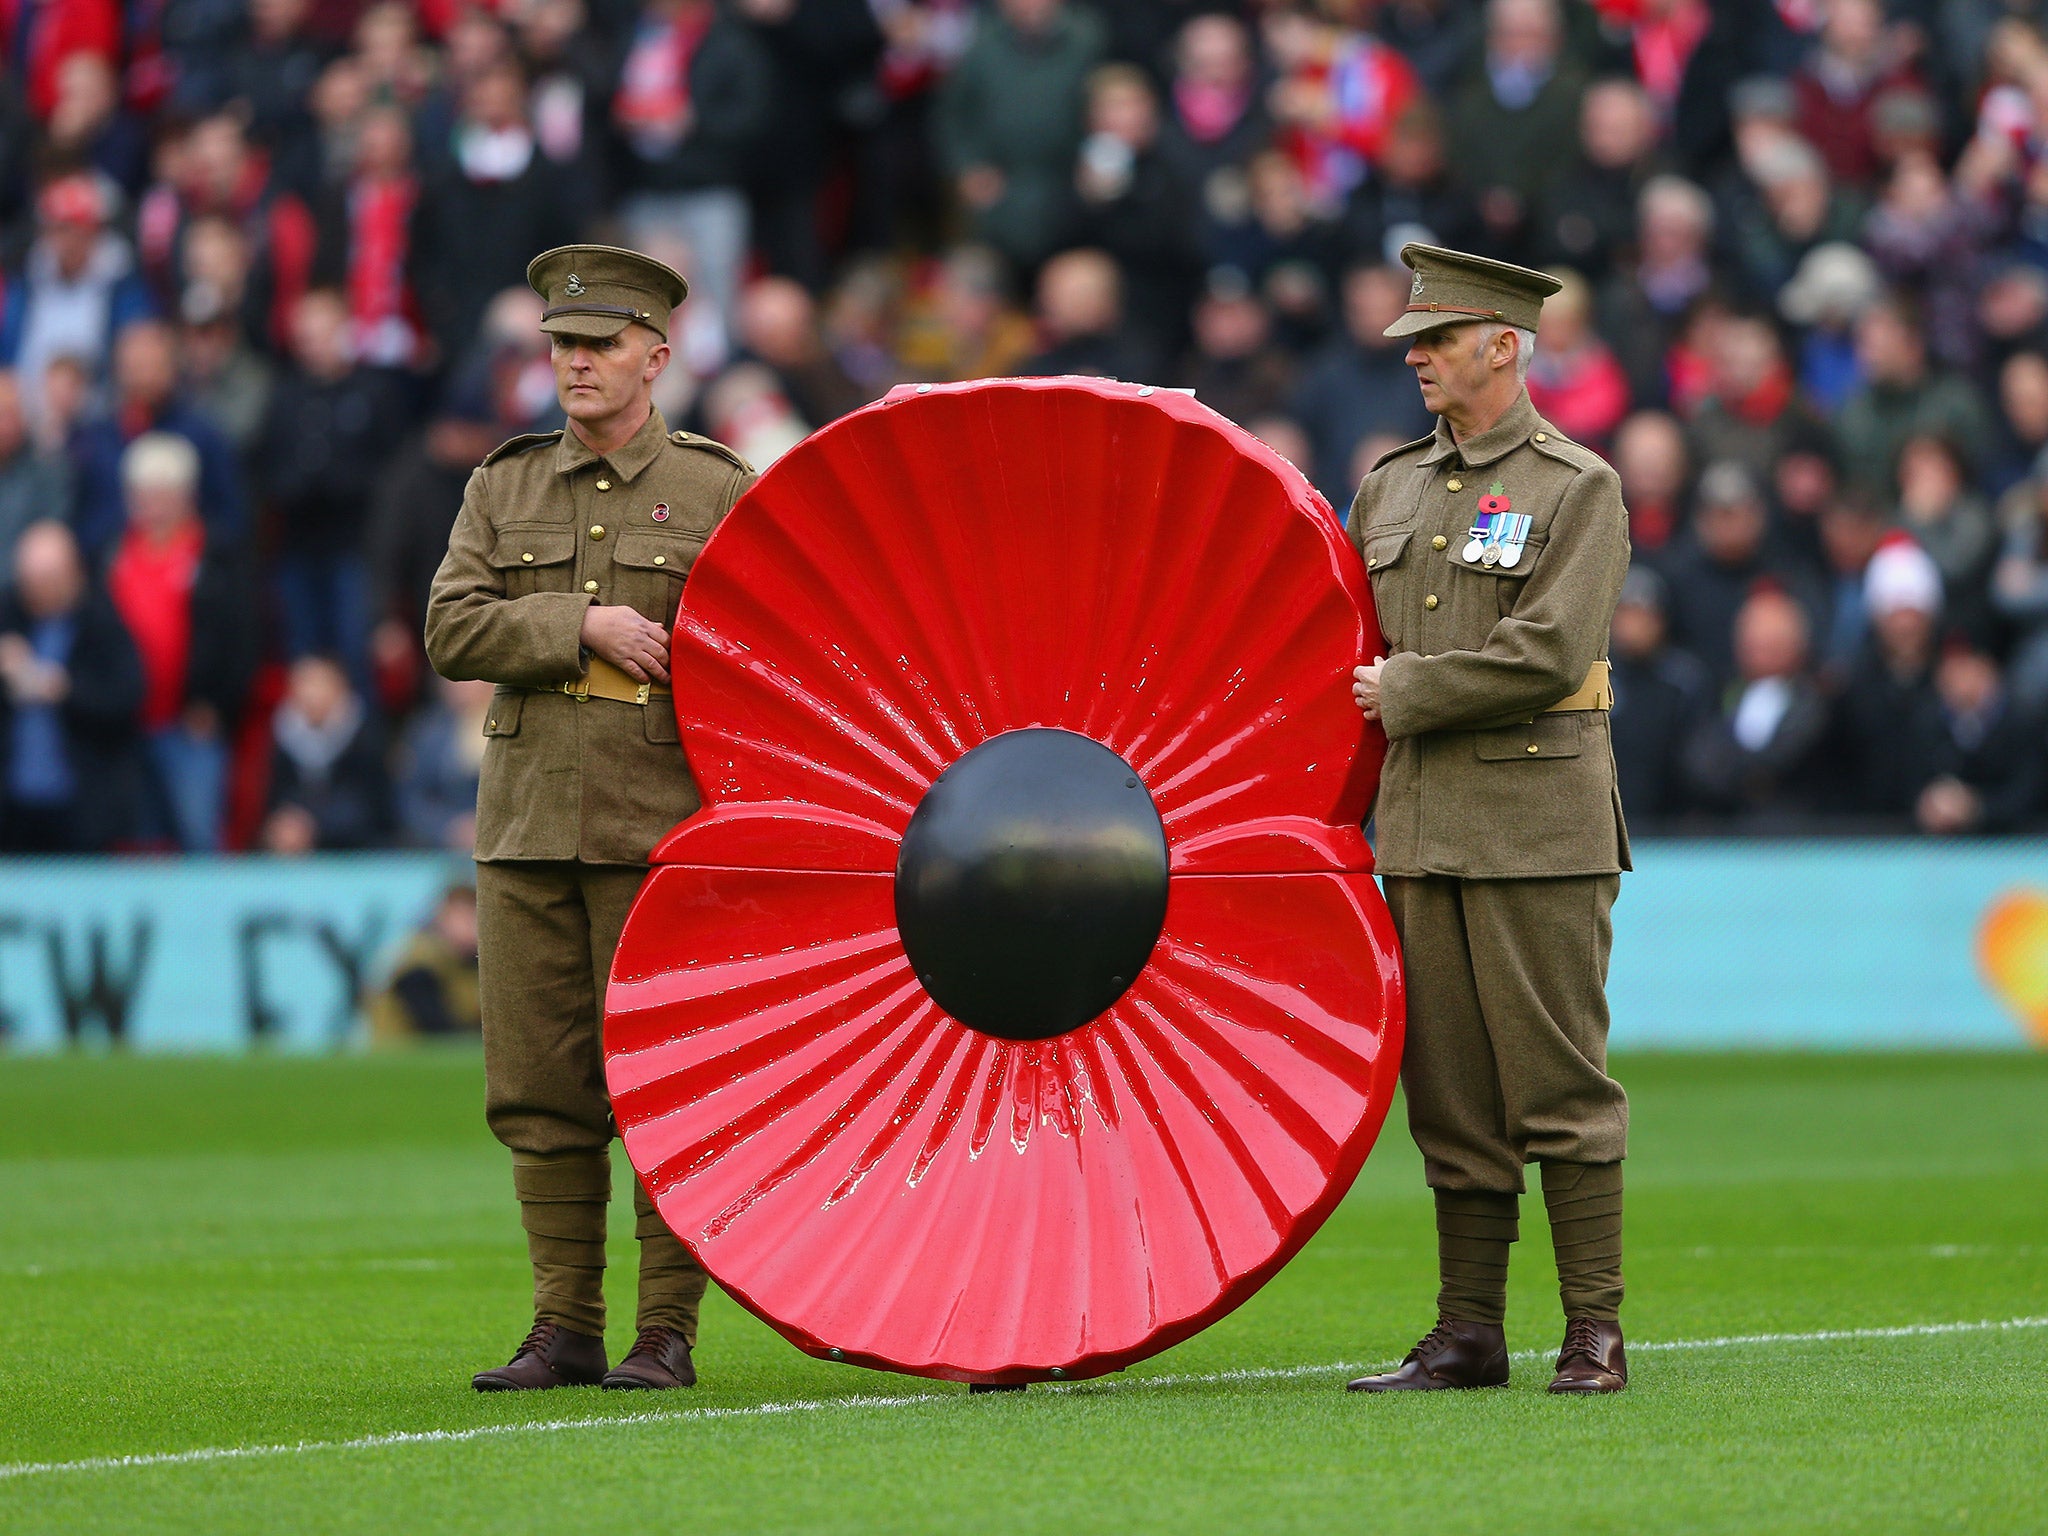 Poppy tributes took place over the last two weeks in the Premier League